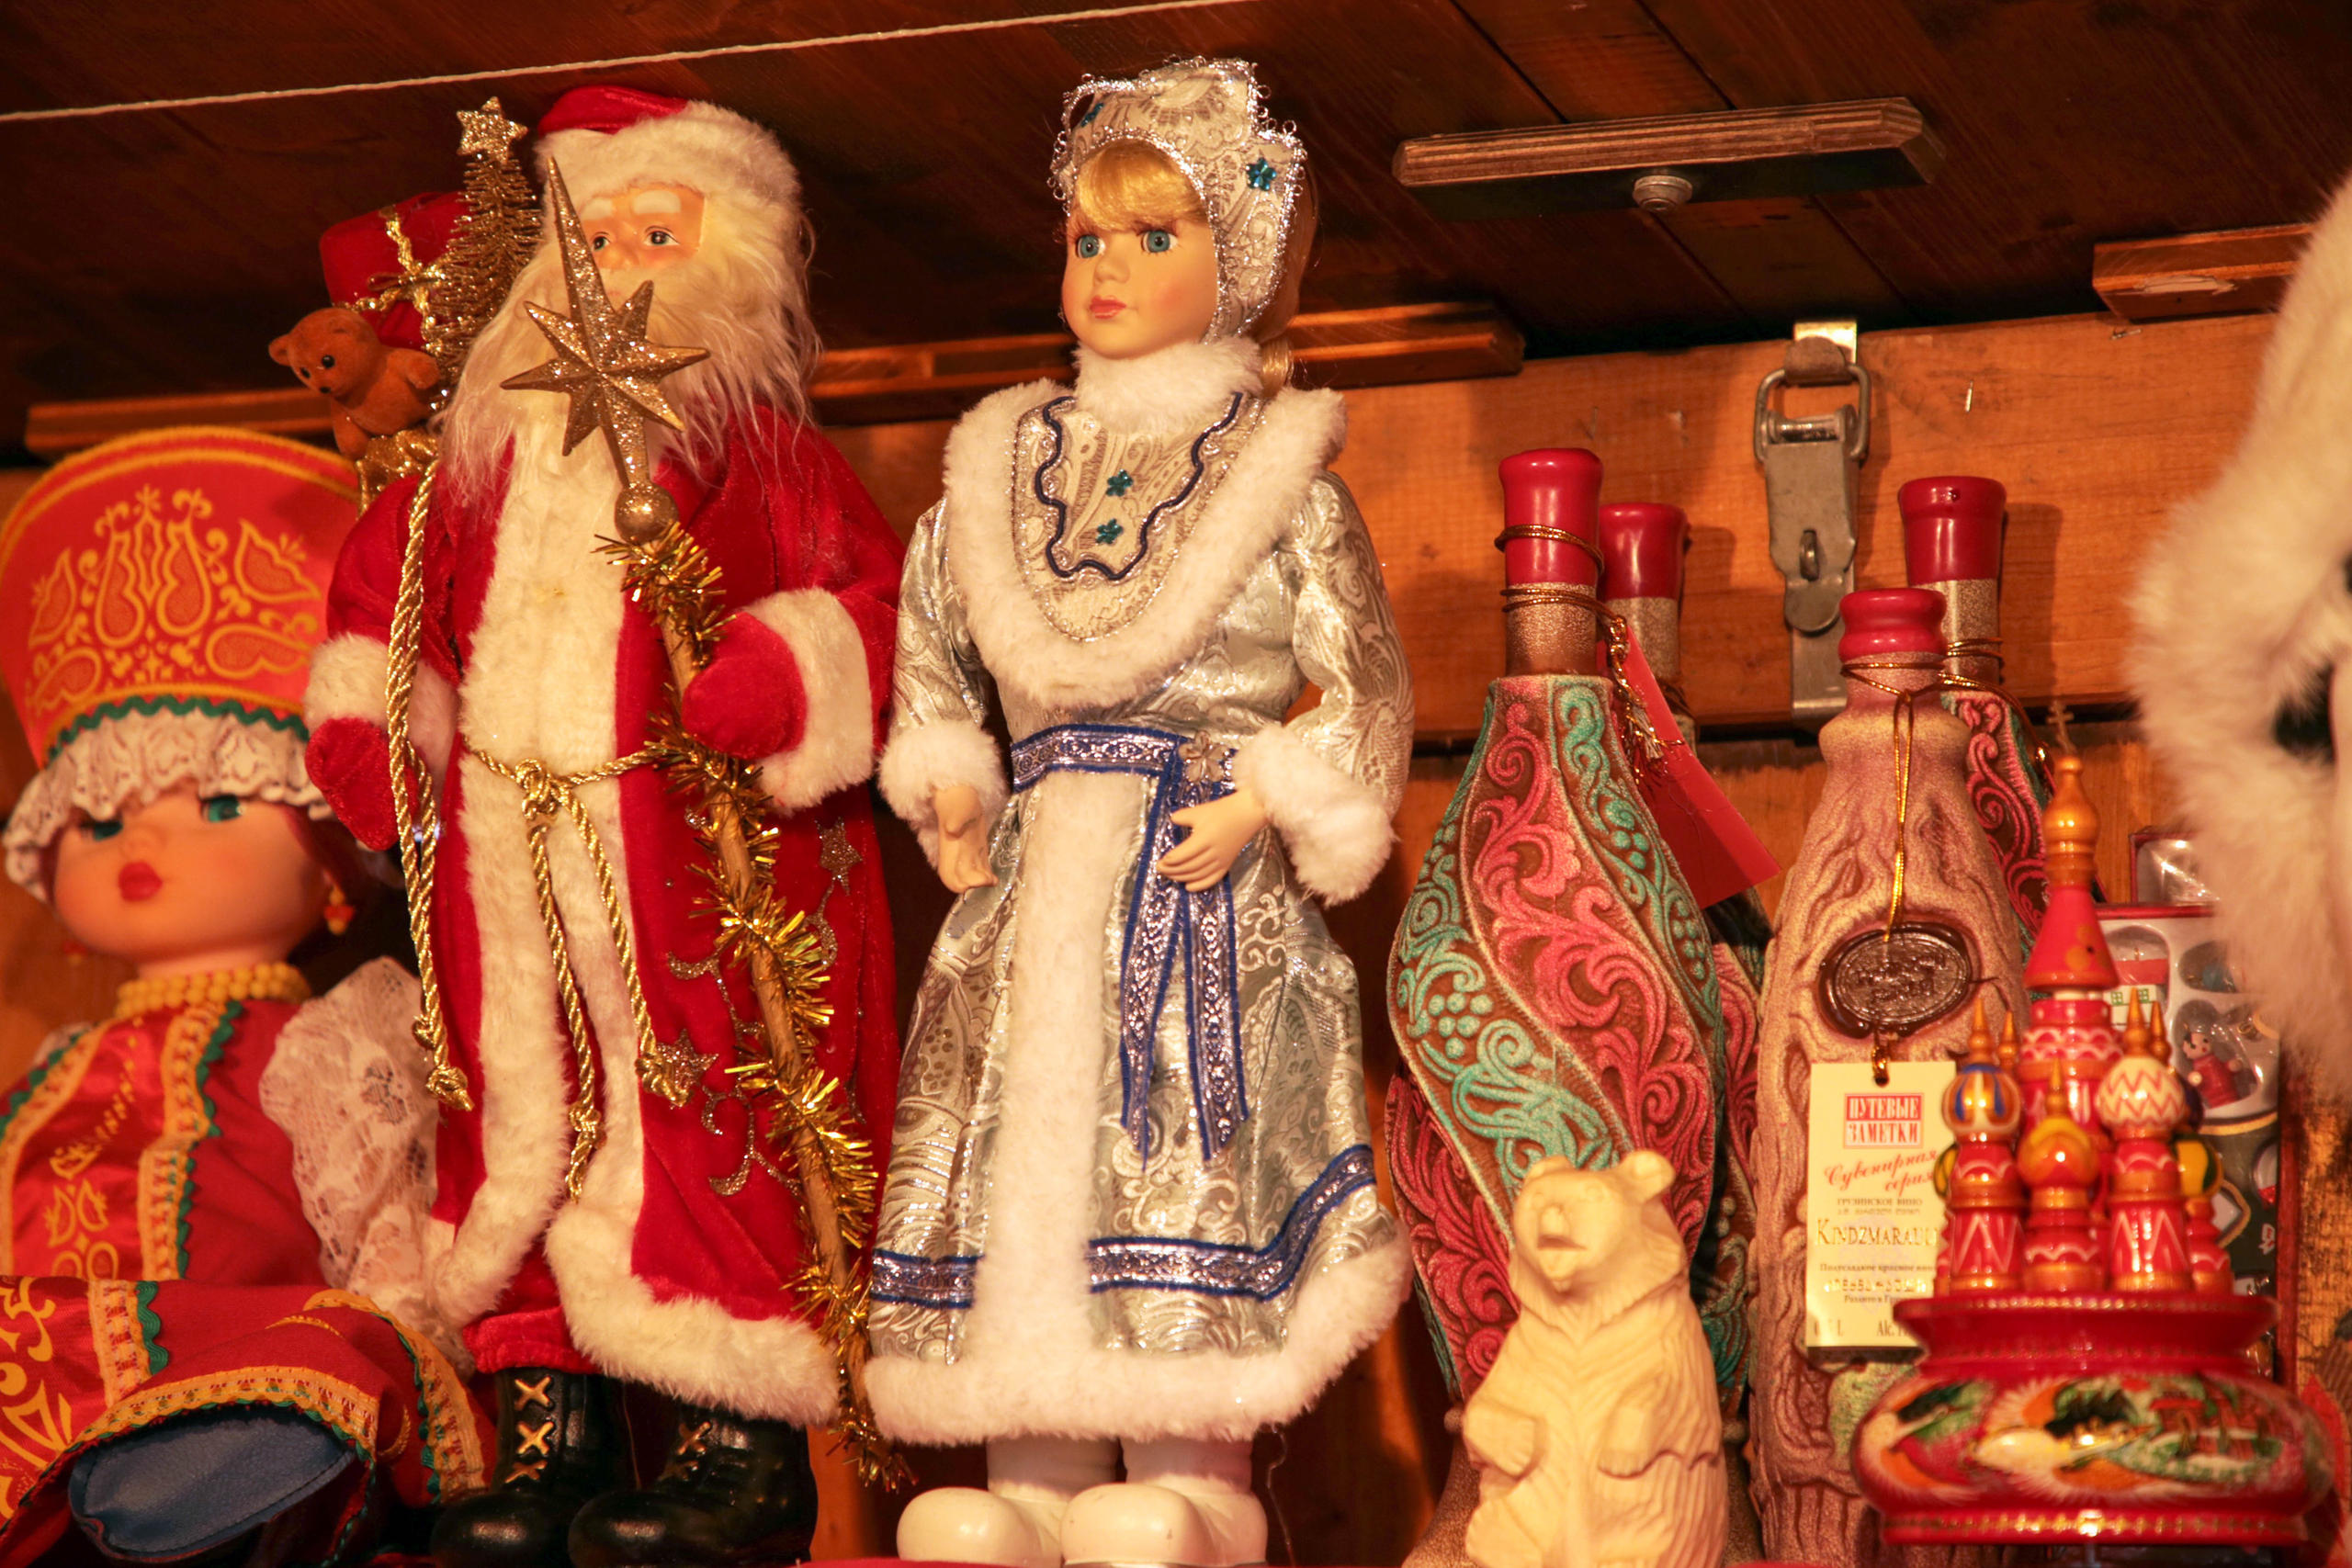 Father Frost and his granddaughter - dolls on shelf